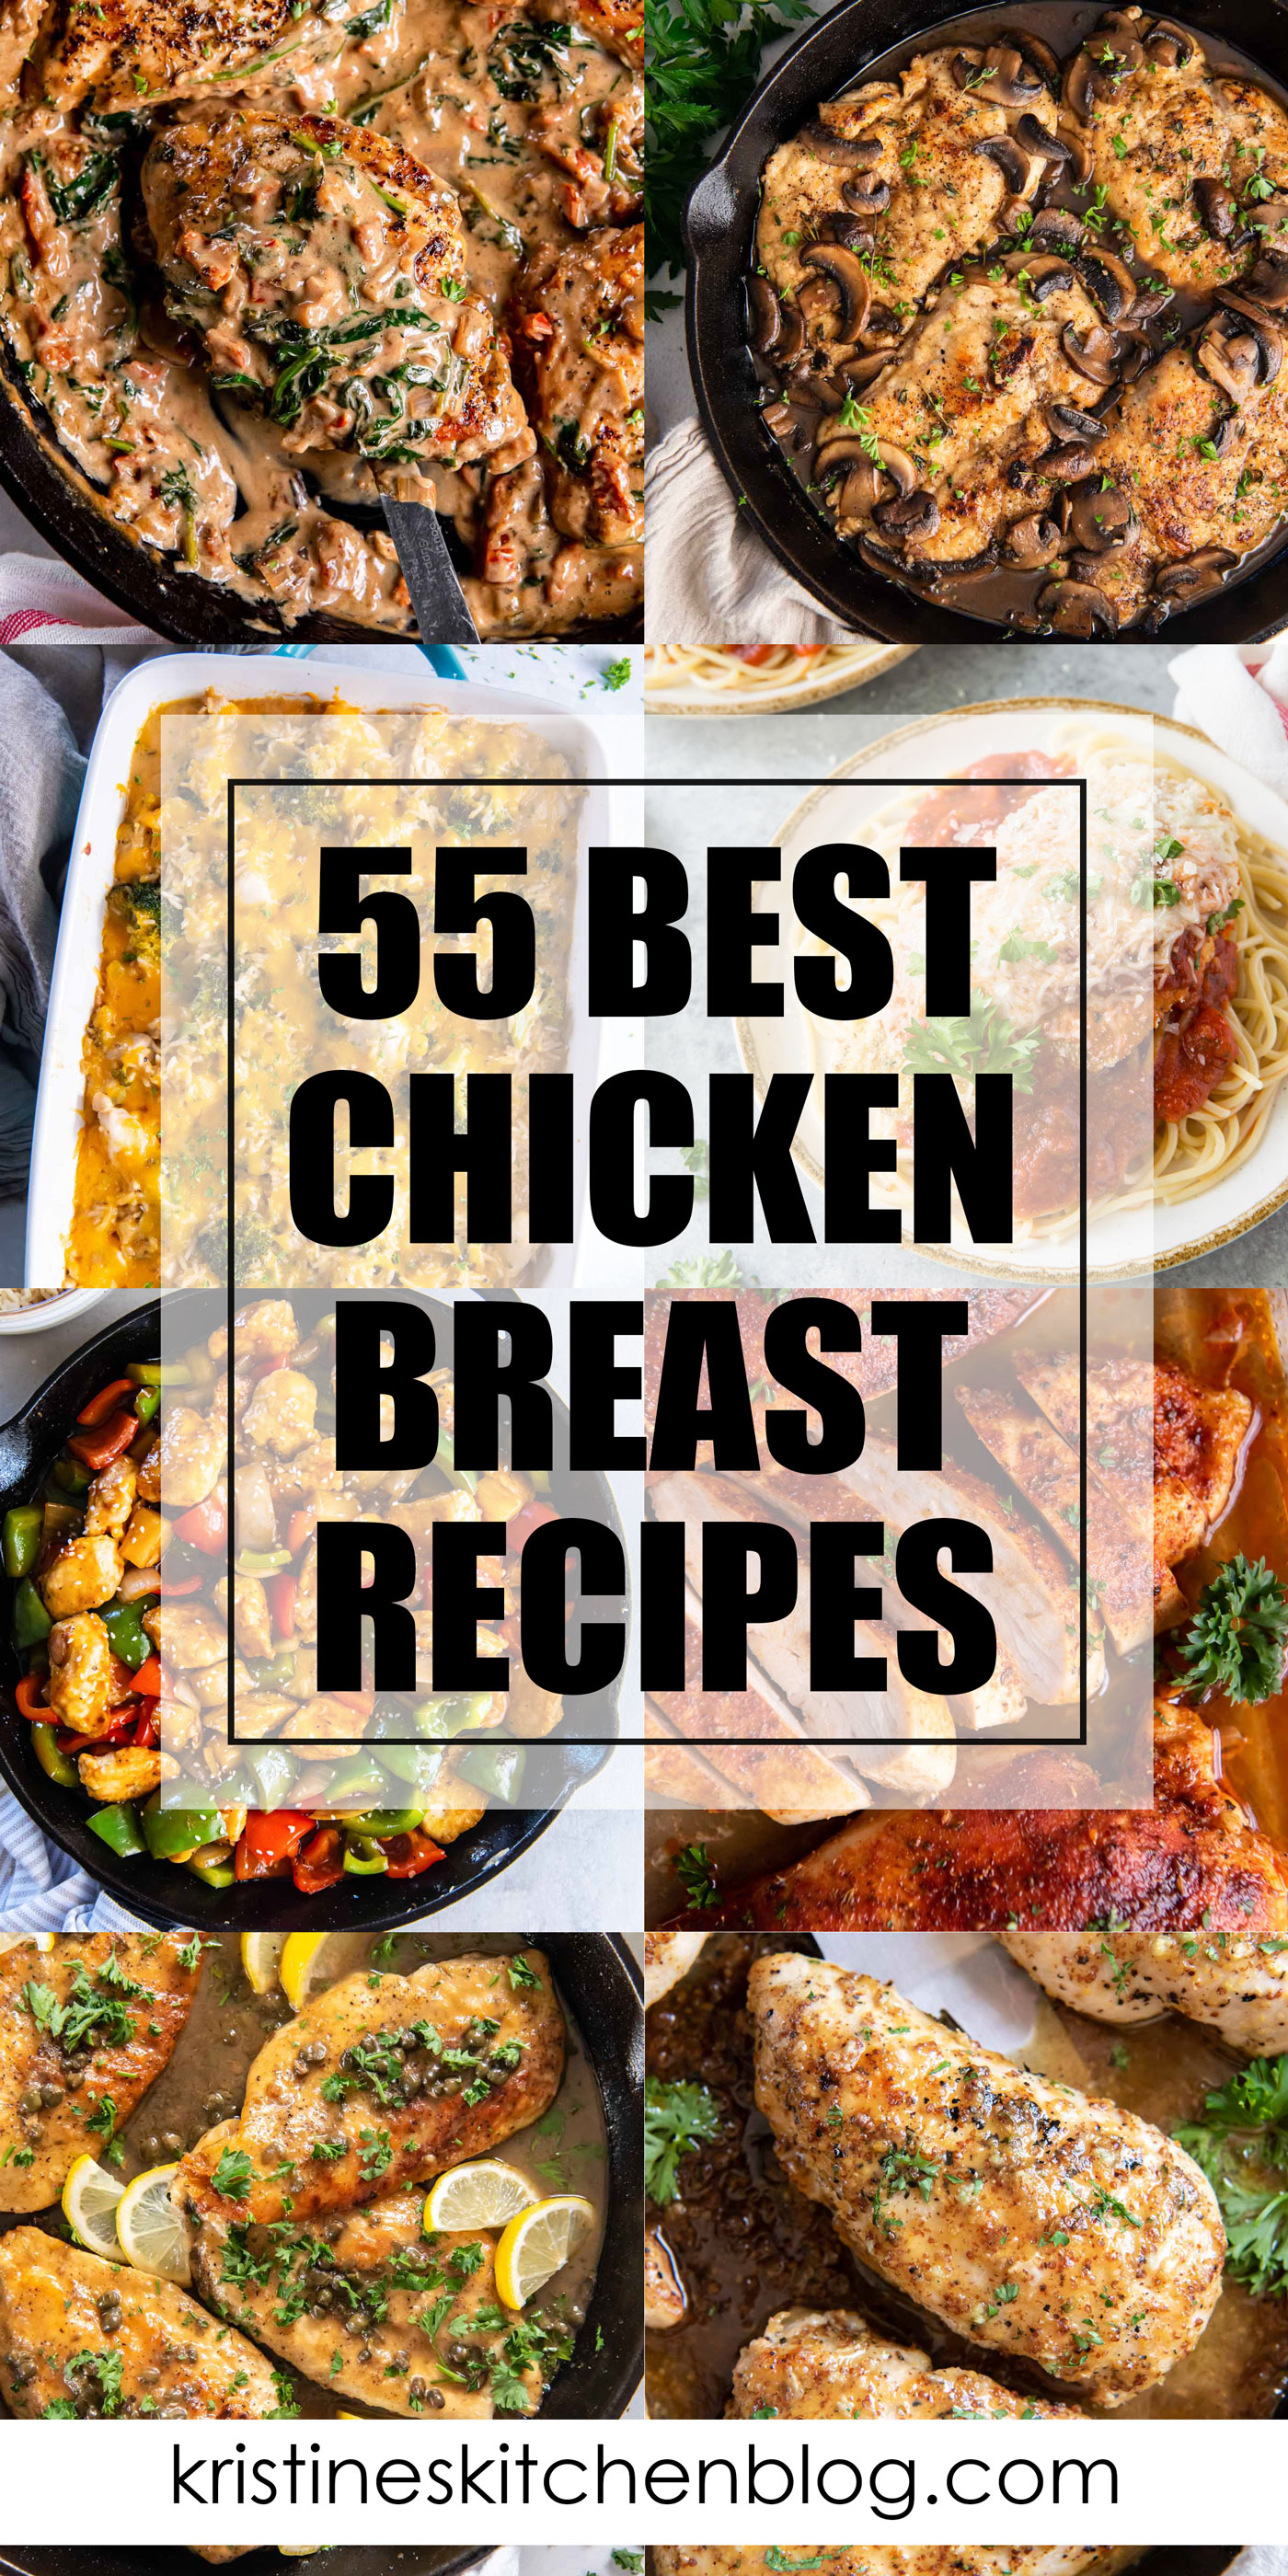 Collage of 8 photos of chicken breast recipes with text overlay.